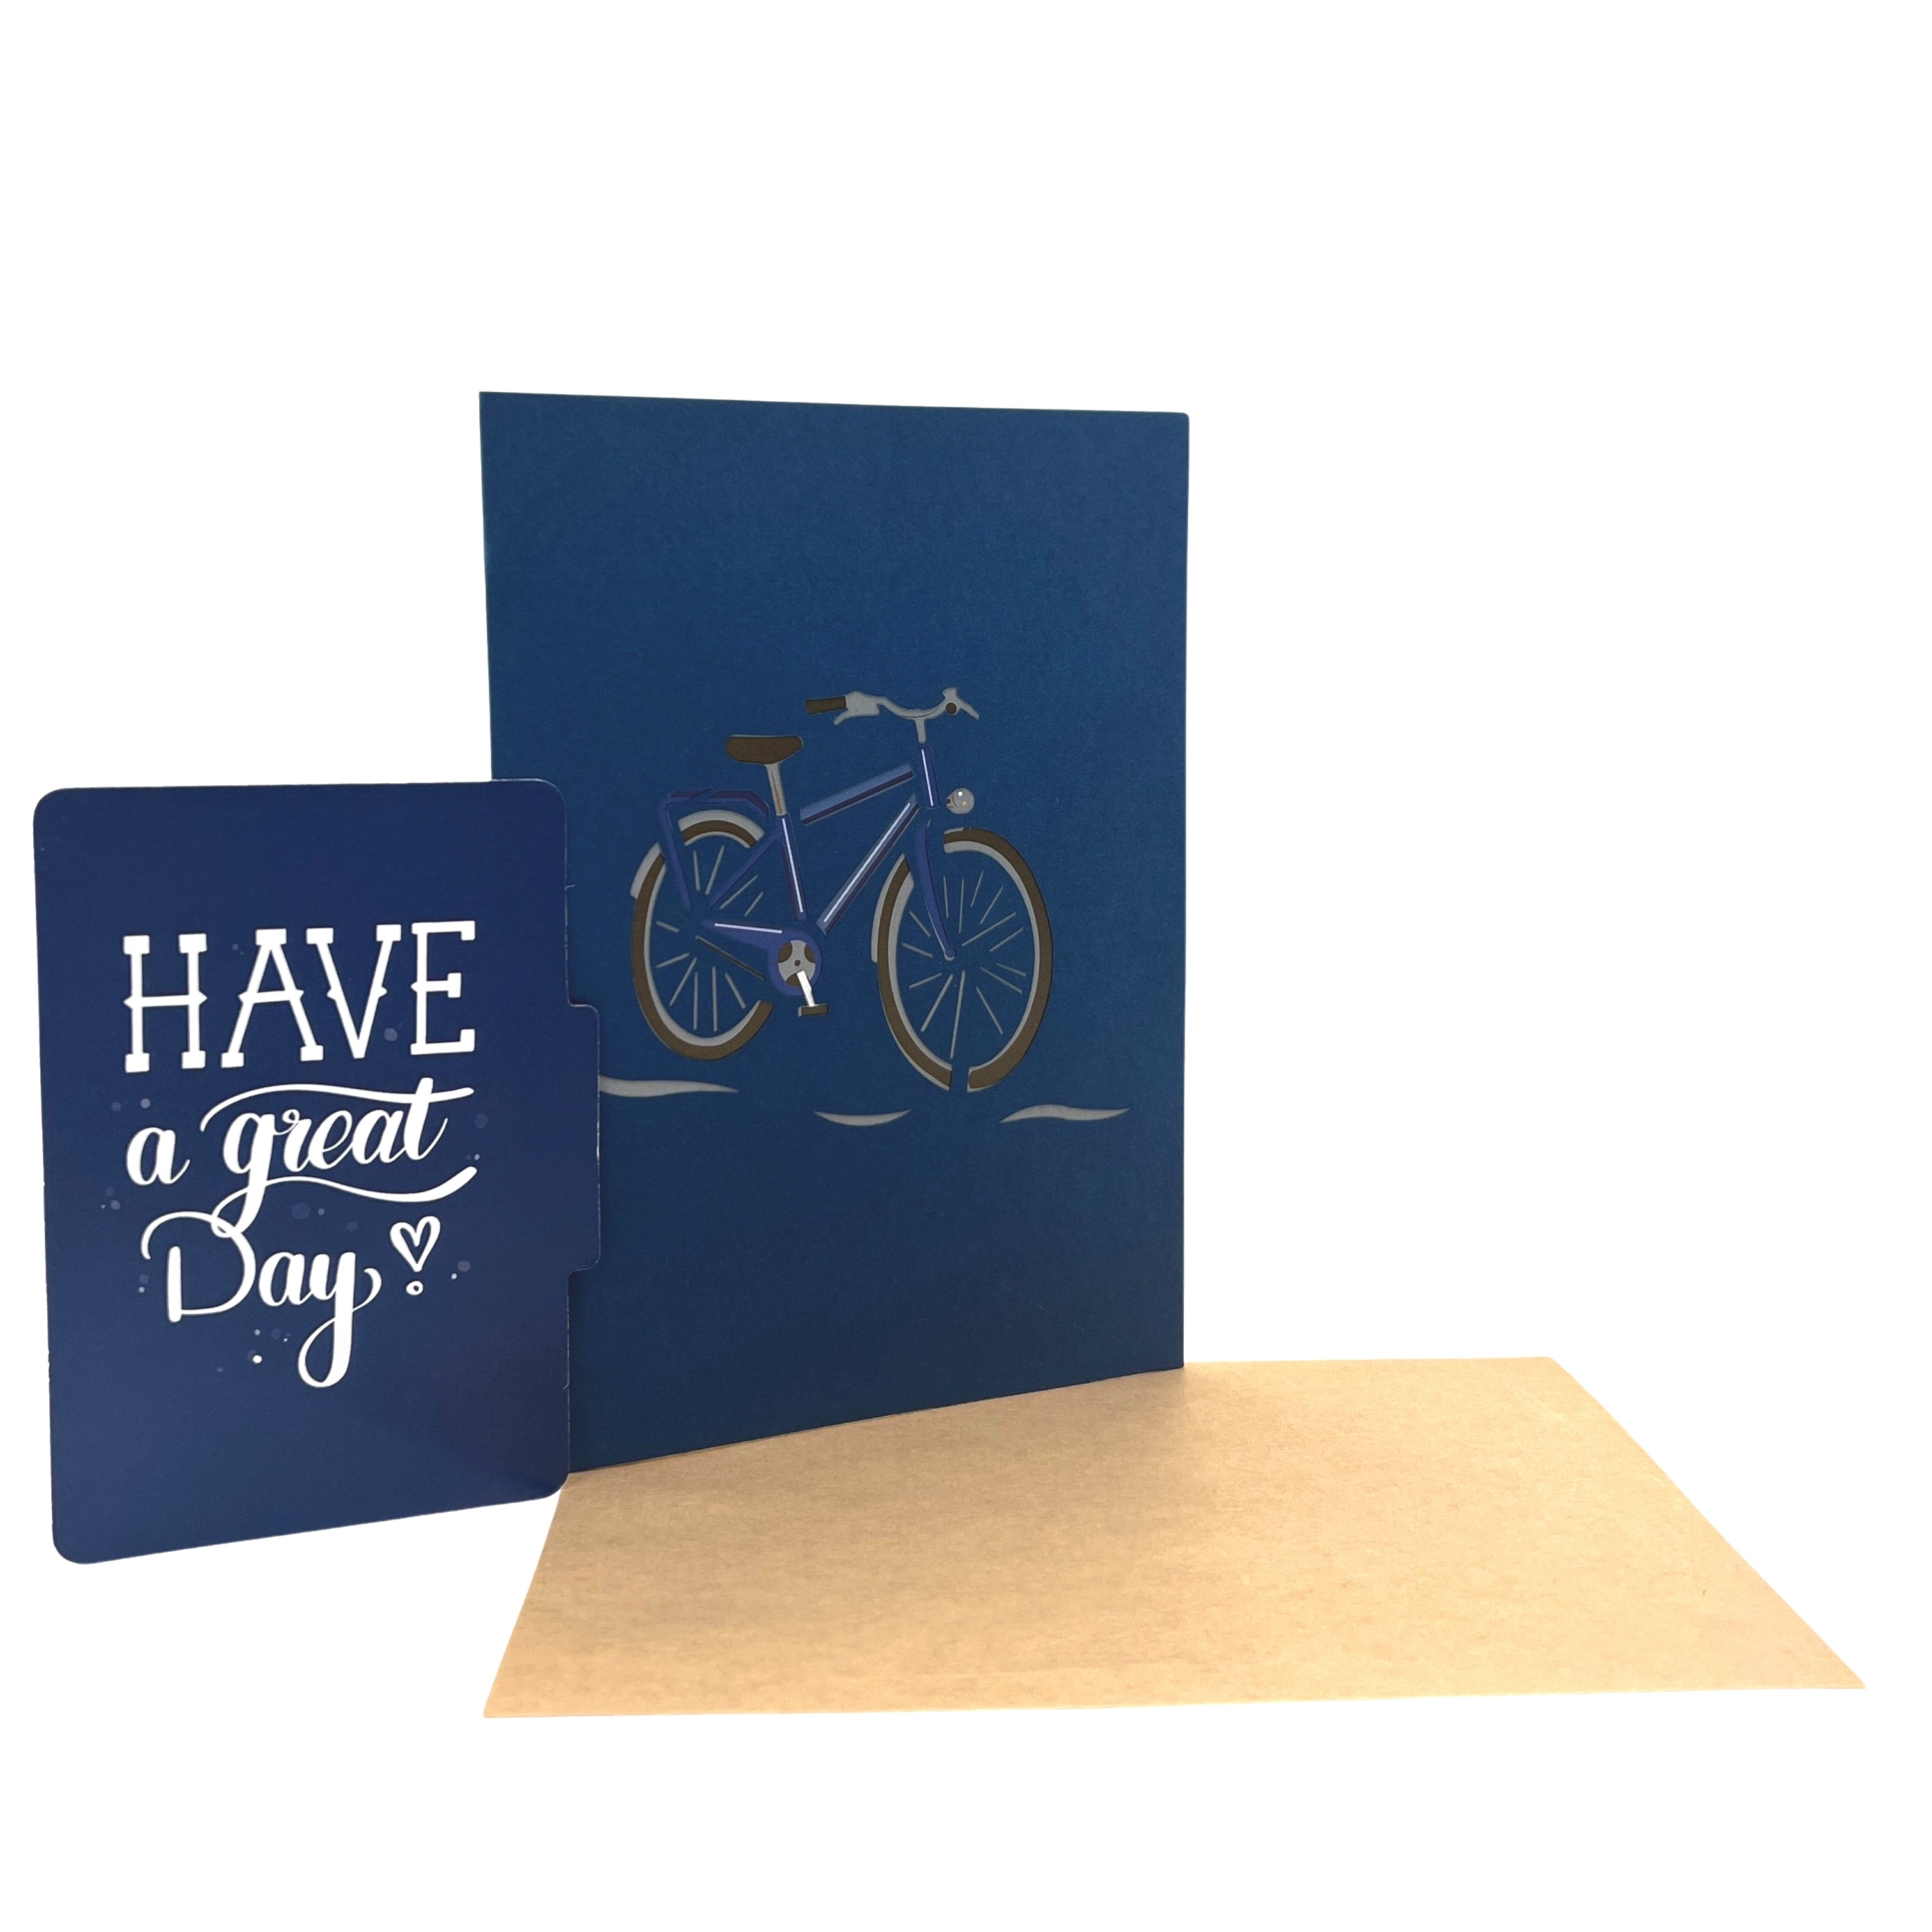 Pop Up Greeting Card Adventure Bicycle Nature Outdoor Camping Card Thank You Birthday Gift for Nature Bike Lover For Mom Dad Family Friend